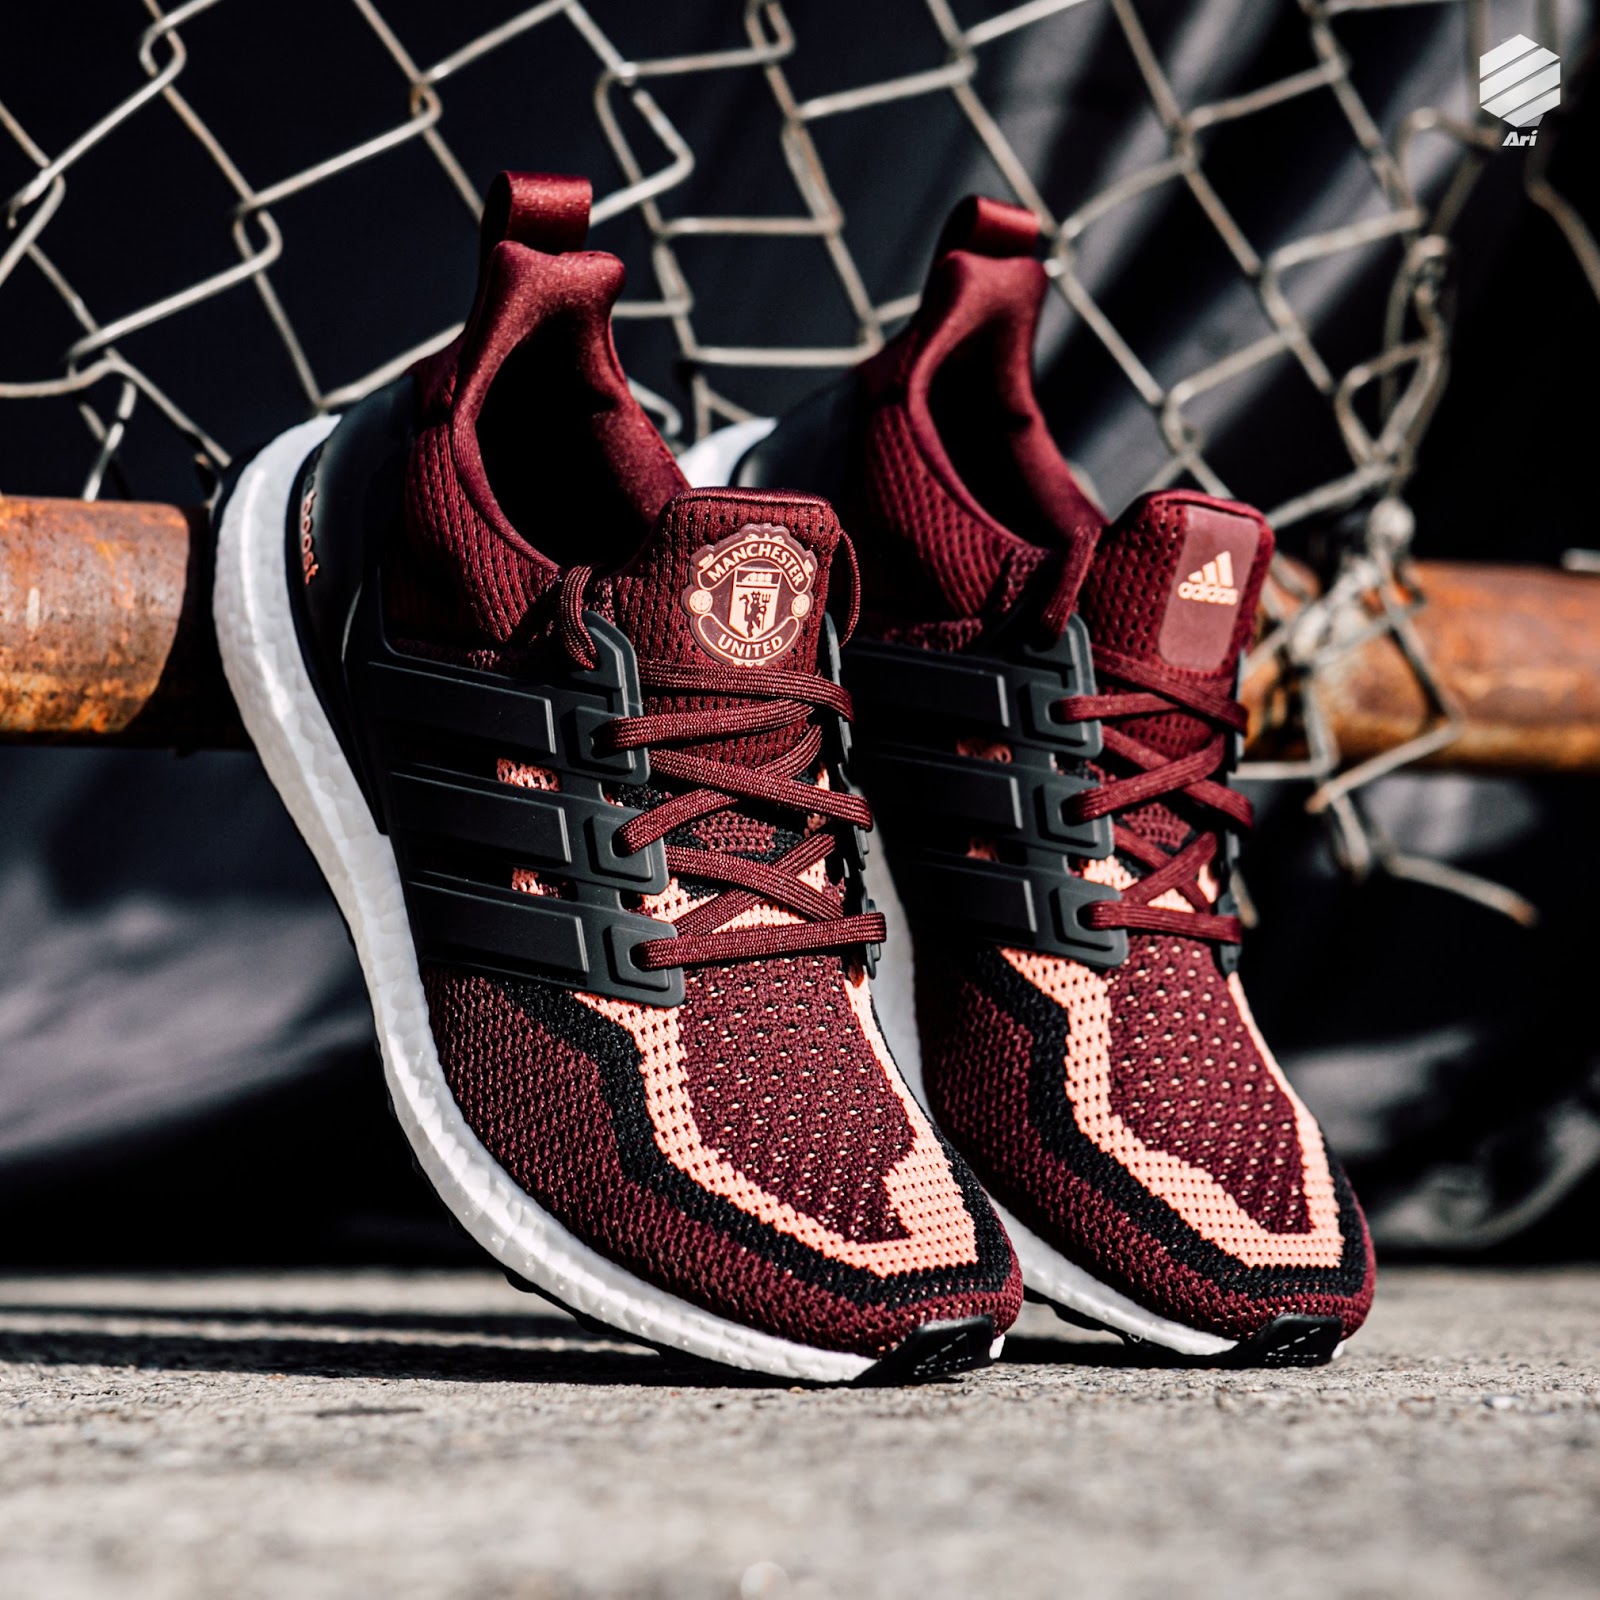 Unique Adidas Manchester United 20-21 Champions League Collection & Ultra Boost Released - Headlines